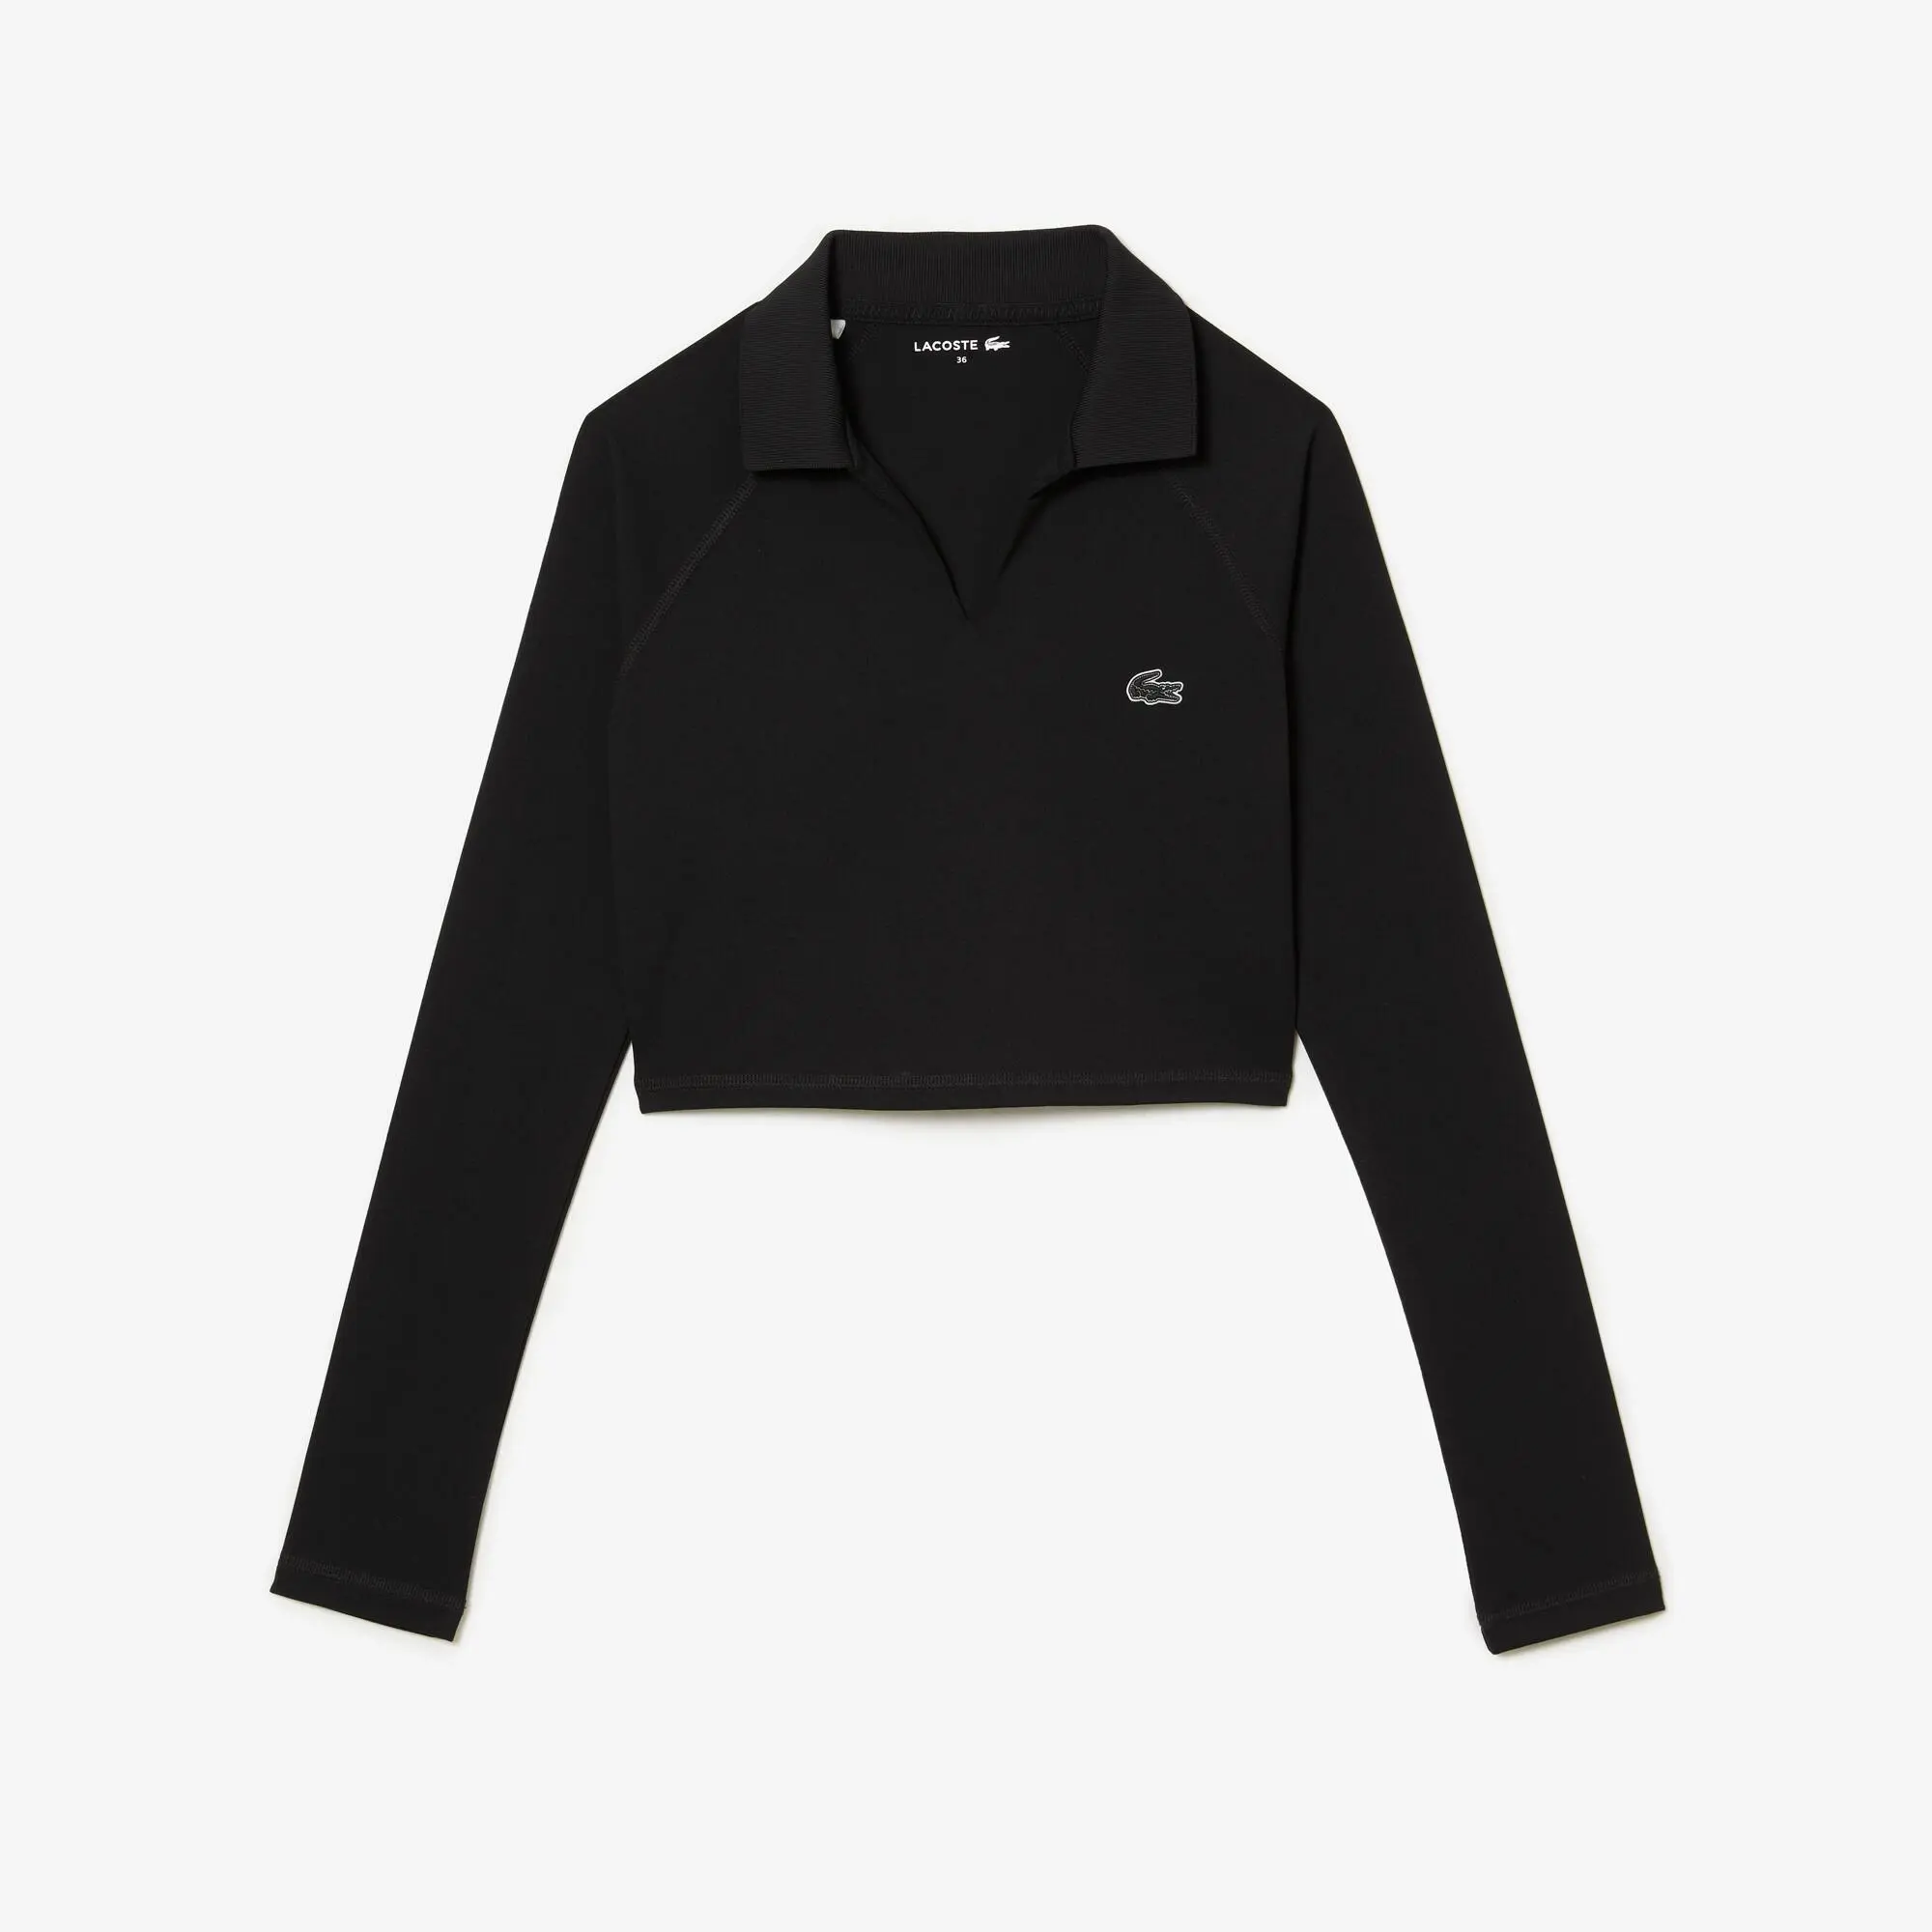 Lacoste Women’s Long Sleeve Cropped Polo Shirt. 2